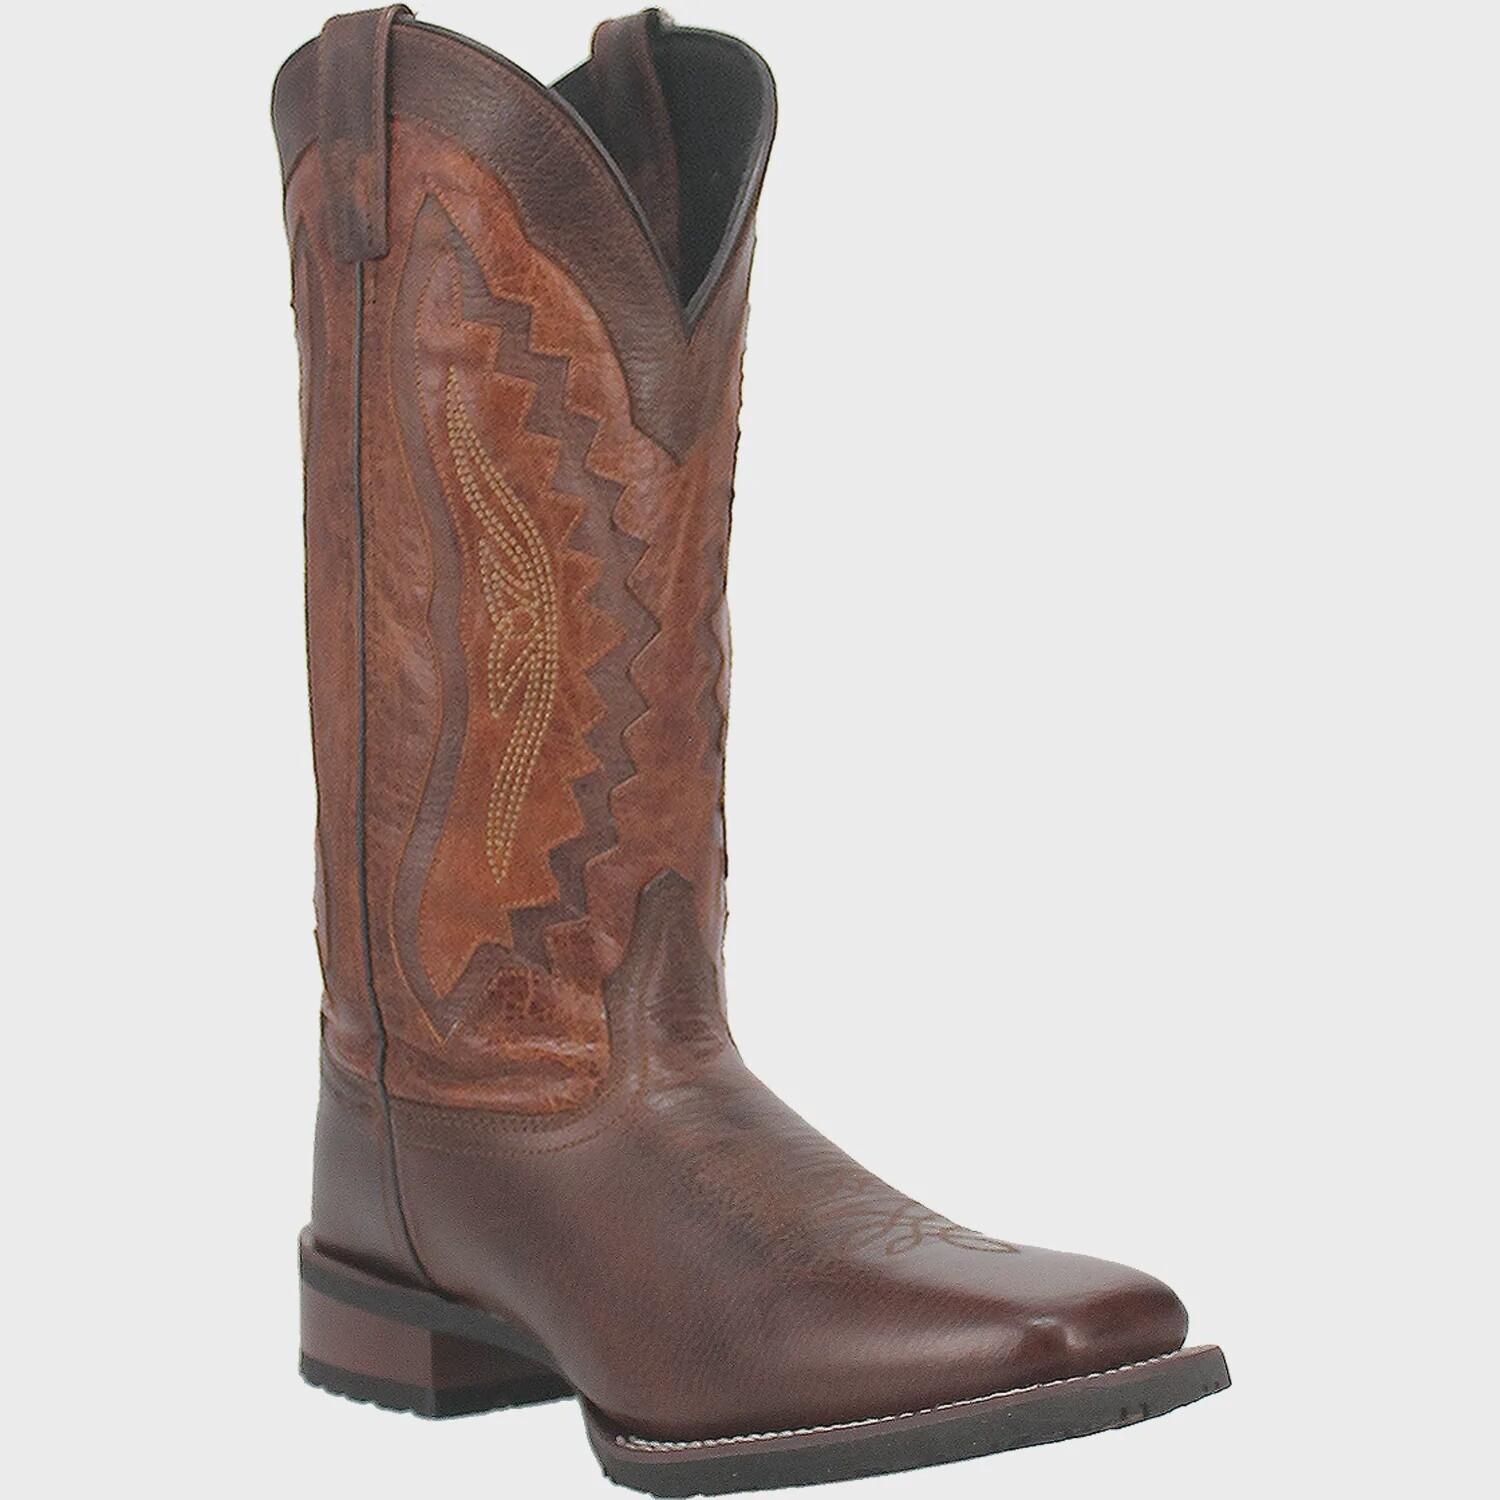 MEN’S LADERO 7953 LUCAS LEATHER BOOT